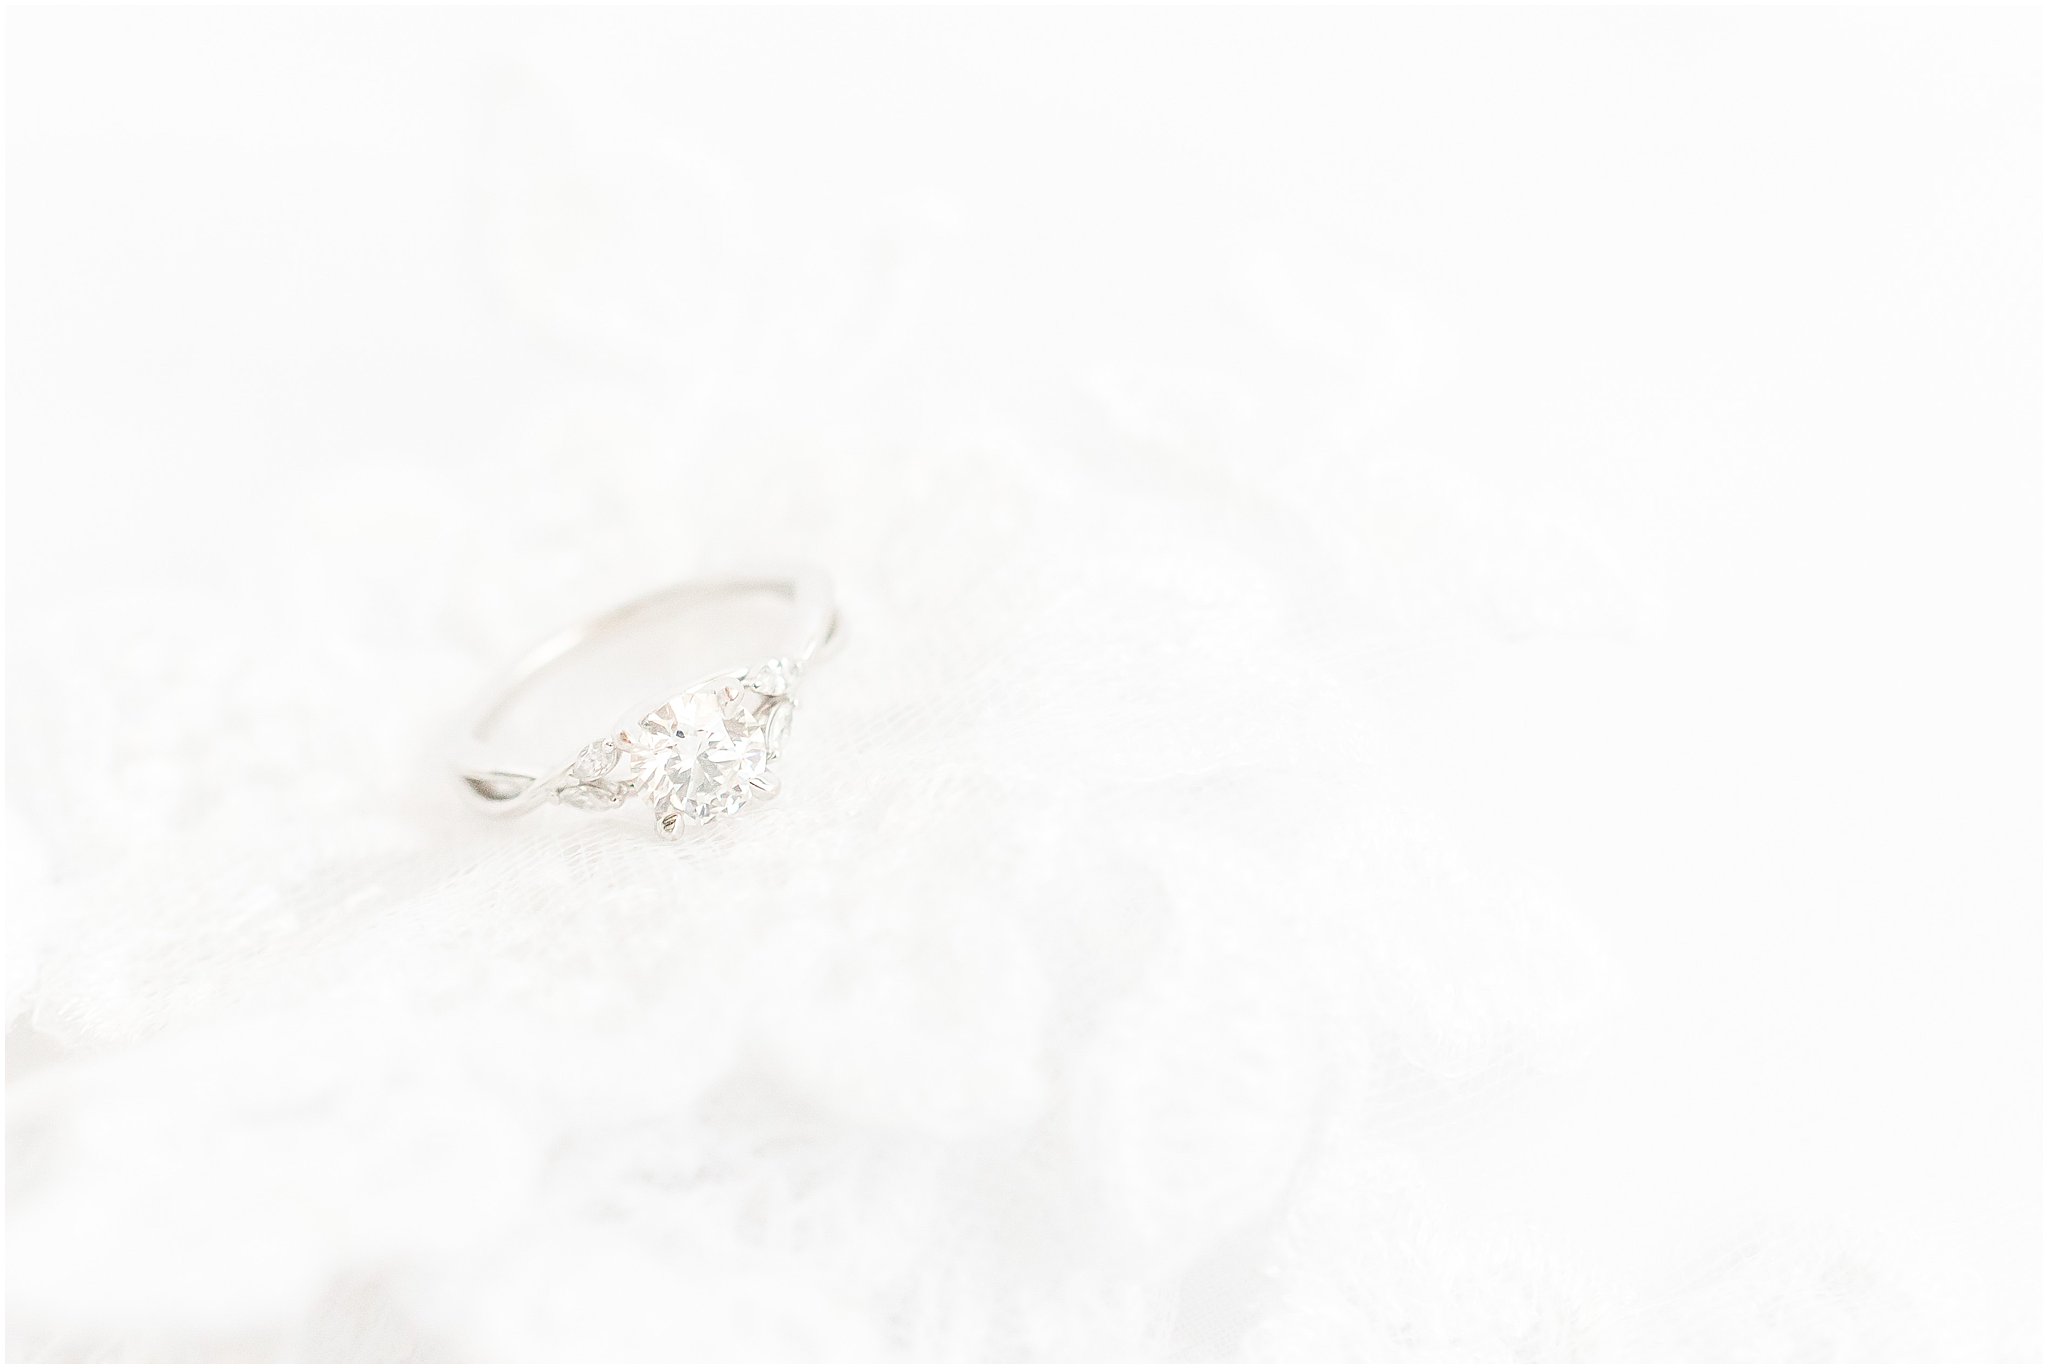 Round cut engagement ring laying on wedding veil lace at The Hawthorns Golf and Country Club